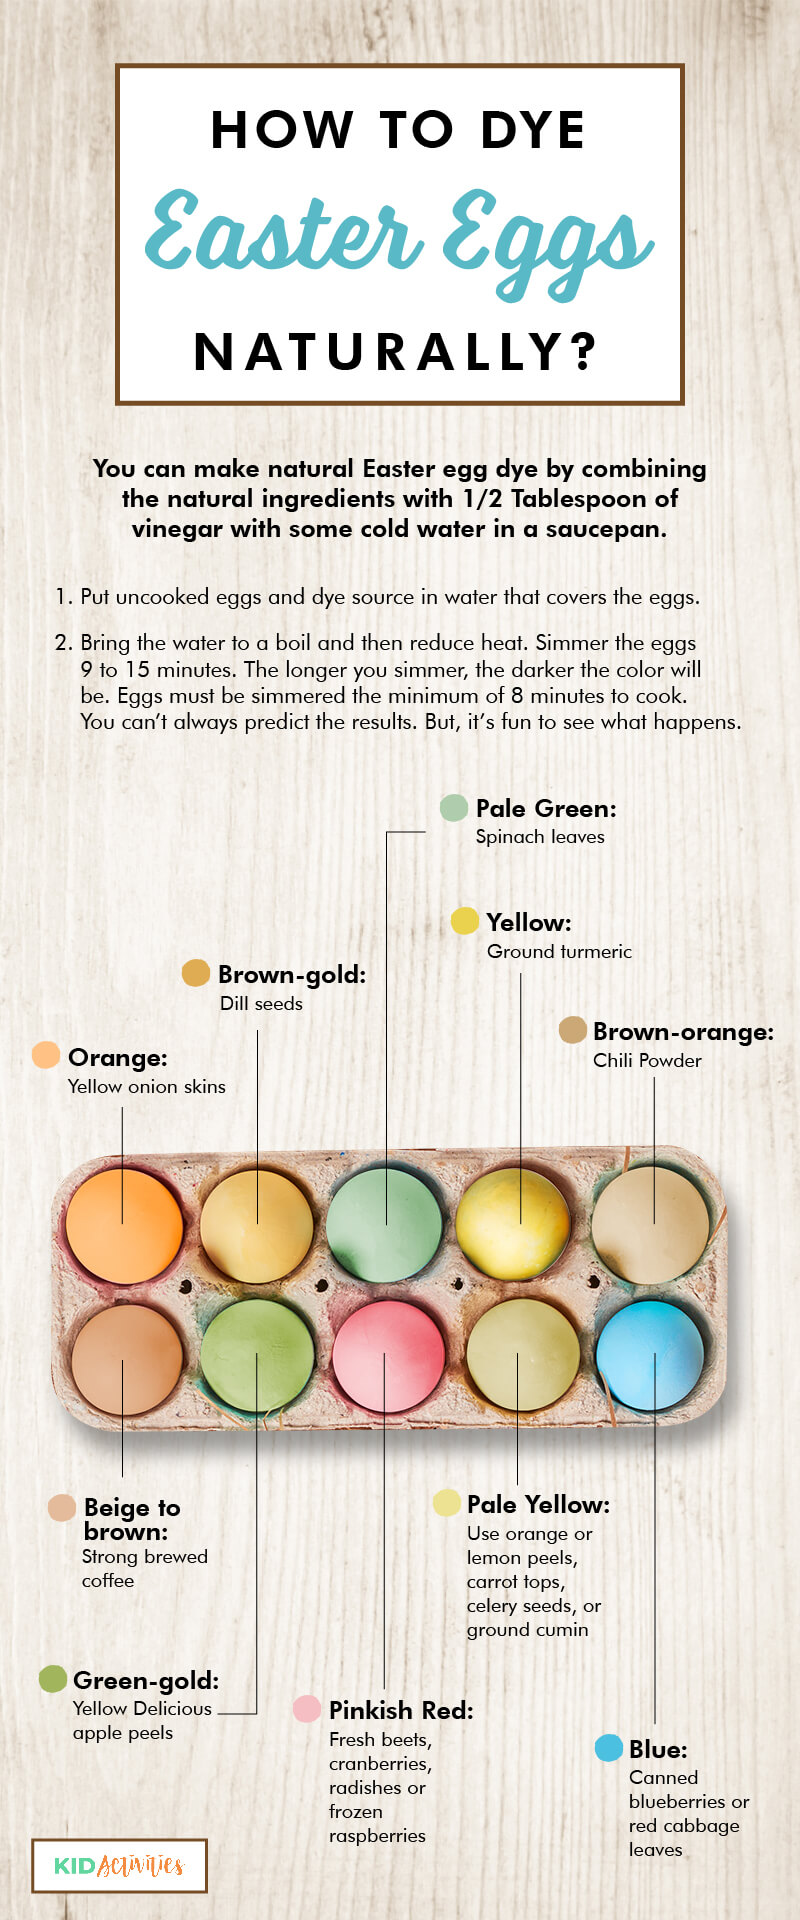 Learn how to dye Easter eggs using natural ingredients, many of which you probably already have. 